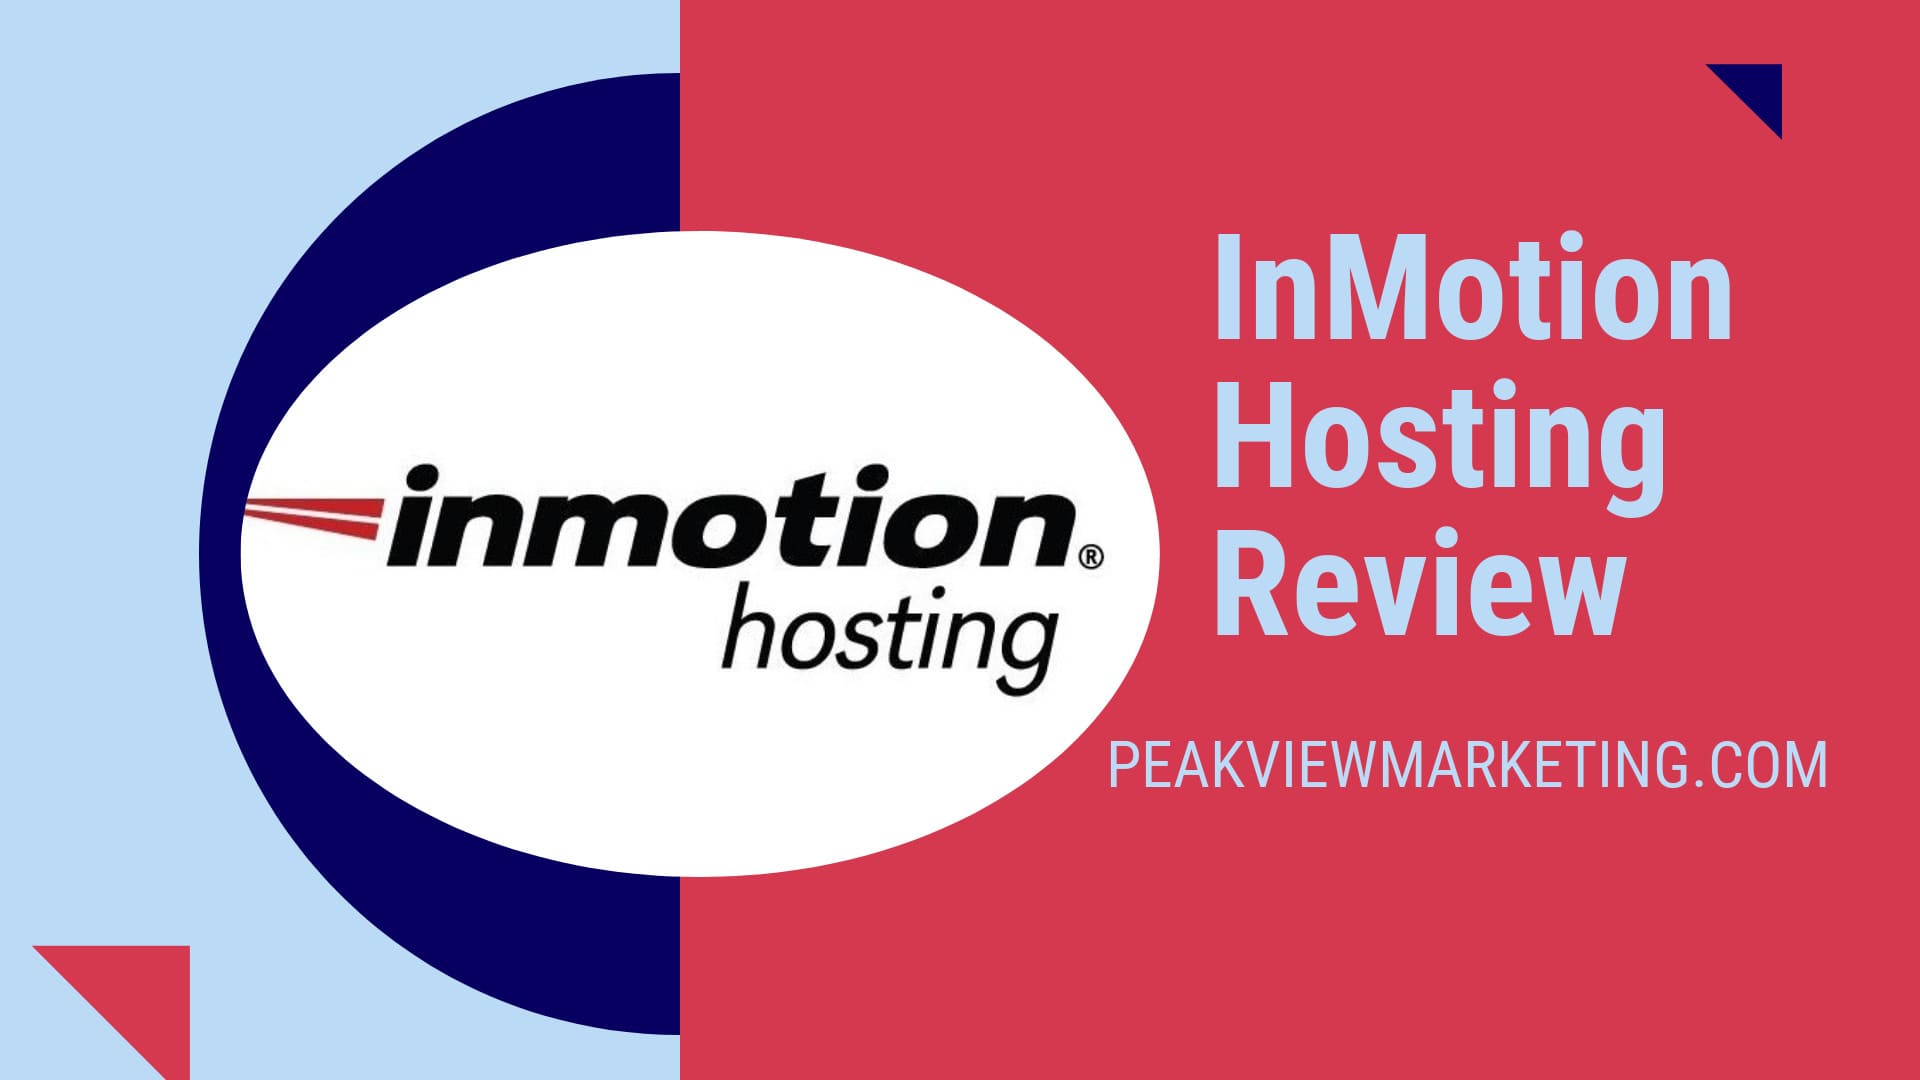 Inmotion Hosting Review Image